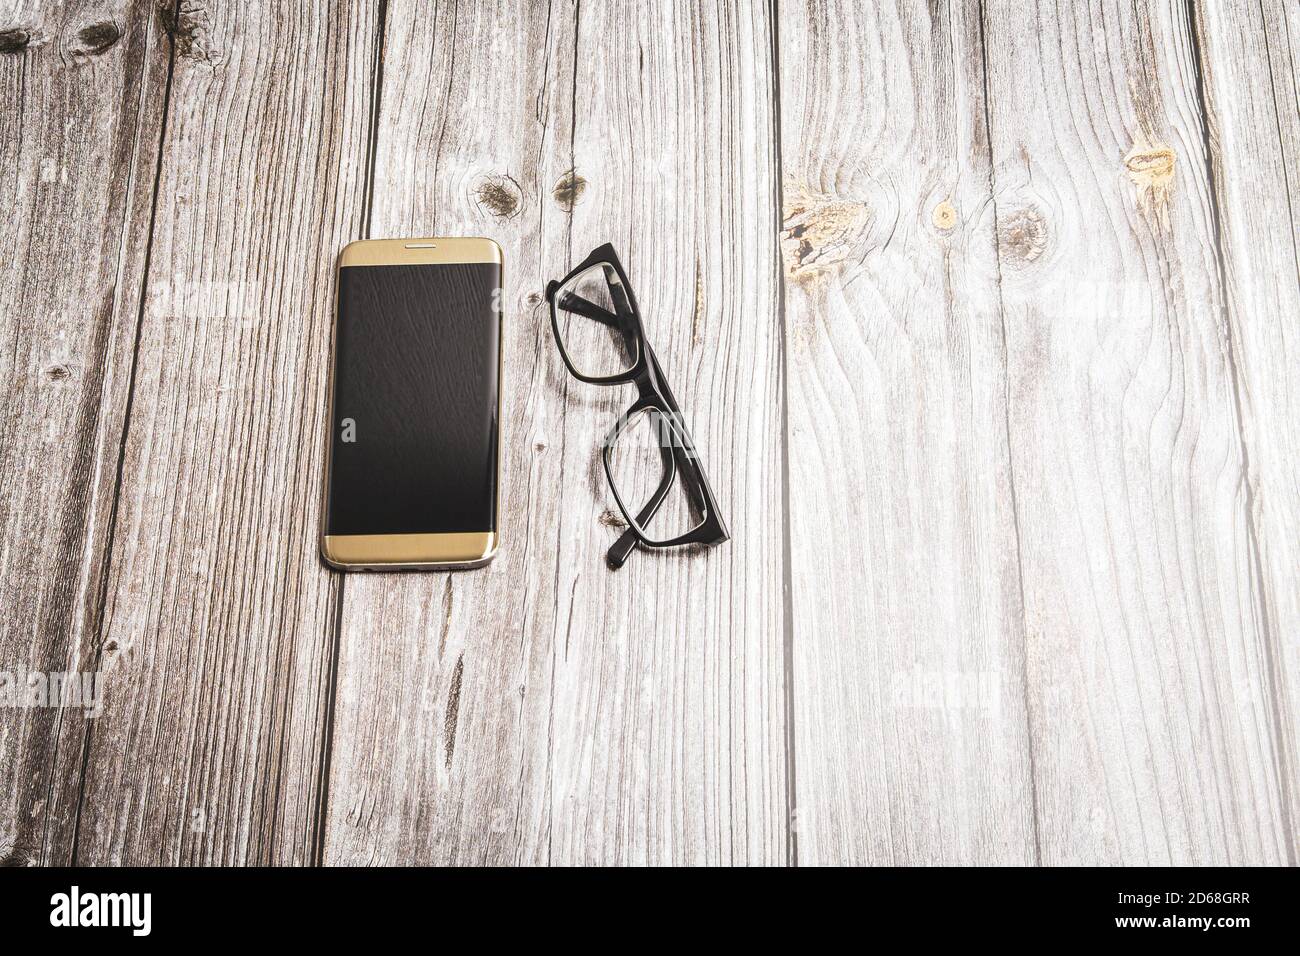 A generic mobile phone or cell phone and a pair of glasses laid on a rustic wooden desk Stock Photo